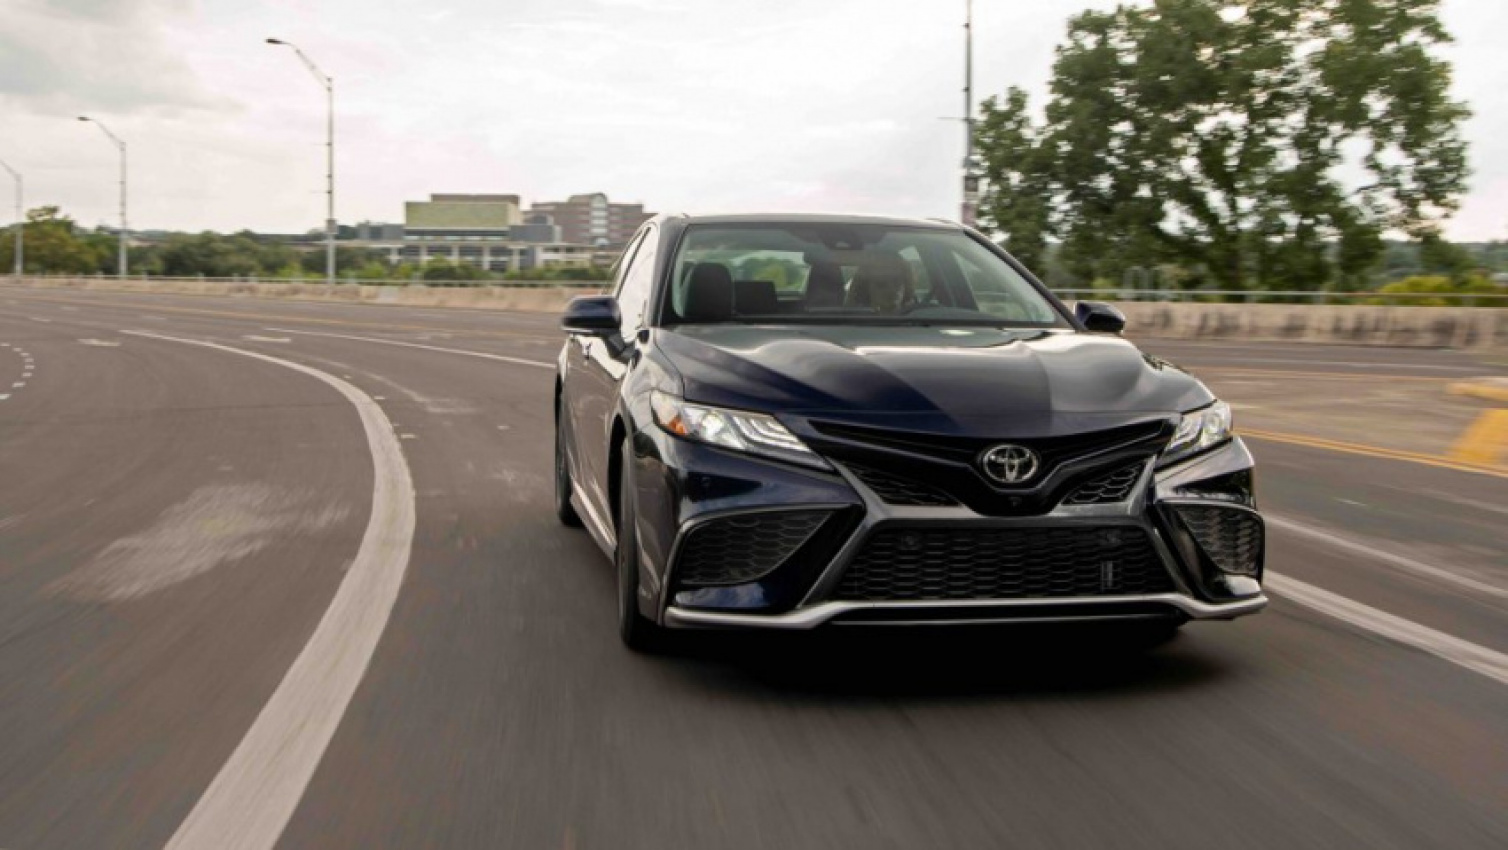 autos, cars, honda, accord, honda accord, 2022 honda accord just scored a win as the best midsize car for the money according to u.s. news